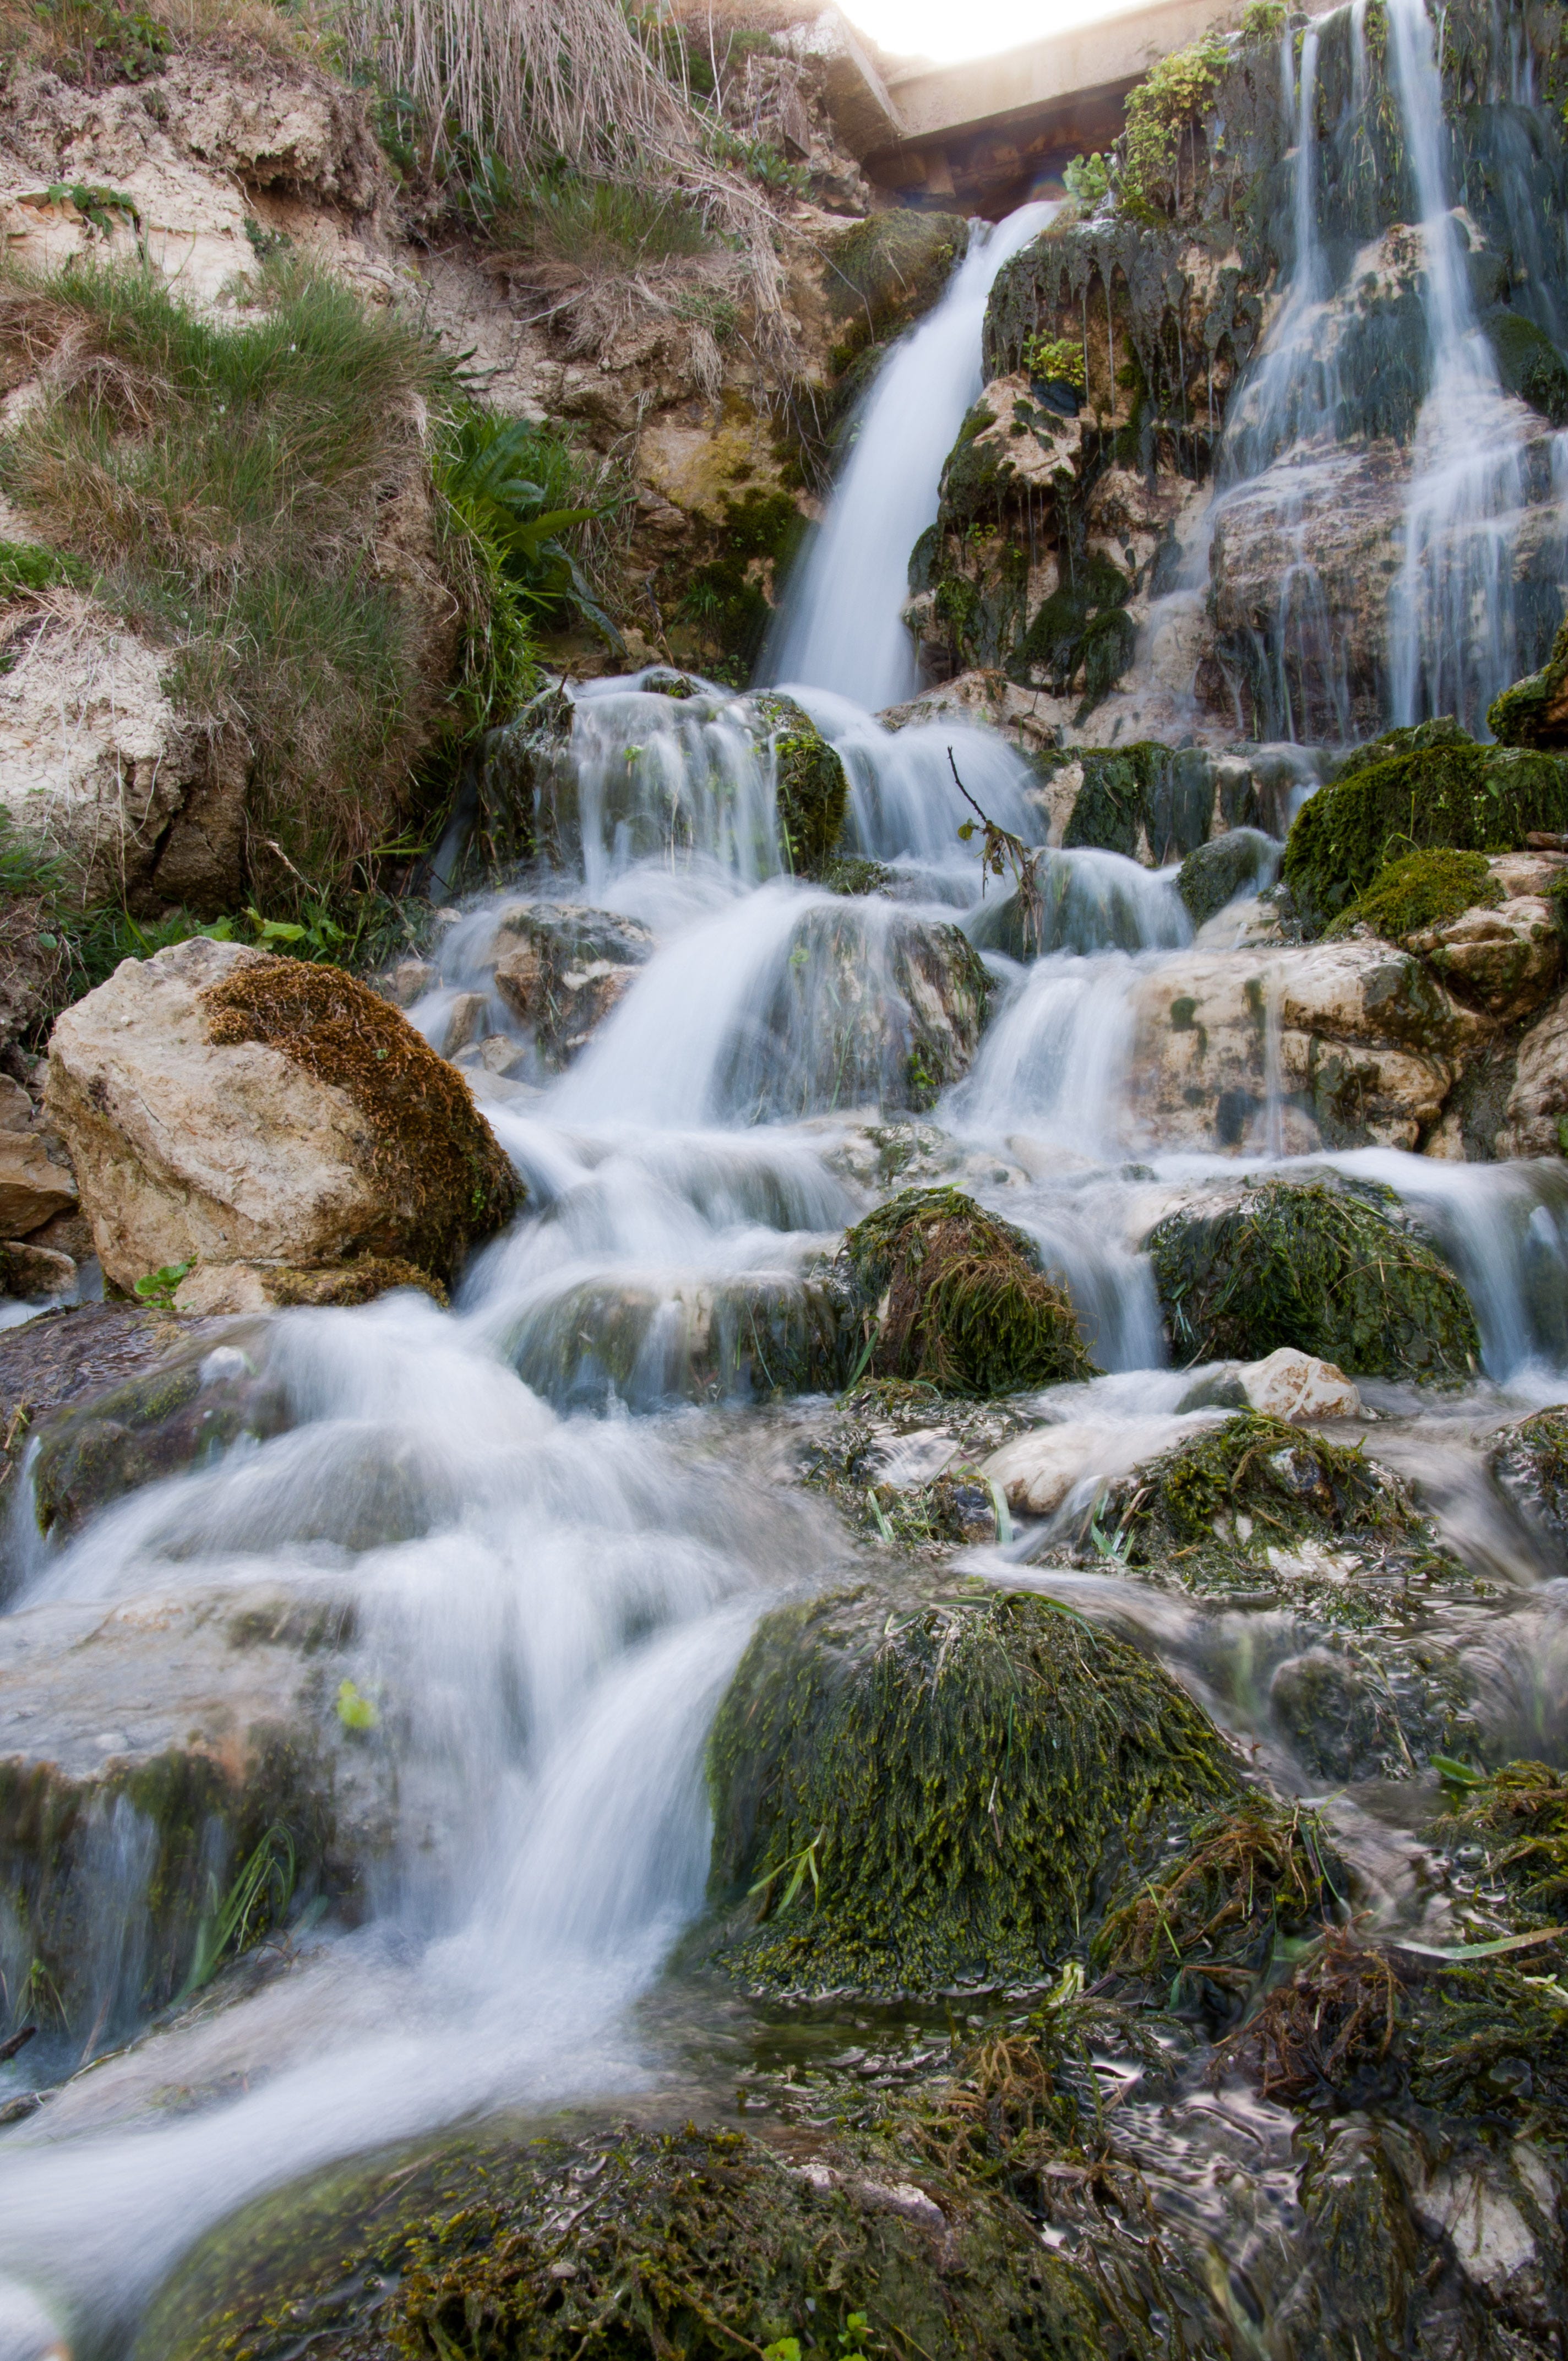 "Waterfall" by Thomas Strosse is licensed under CC BY-SA 2.0 